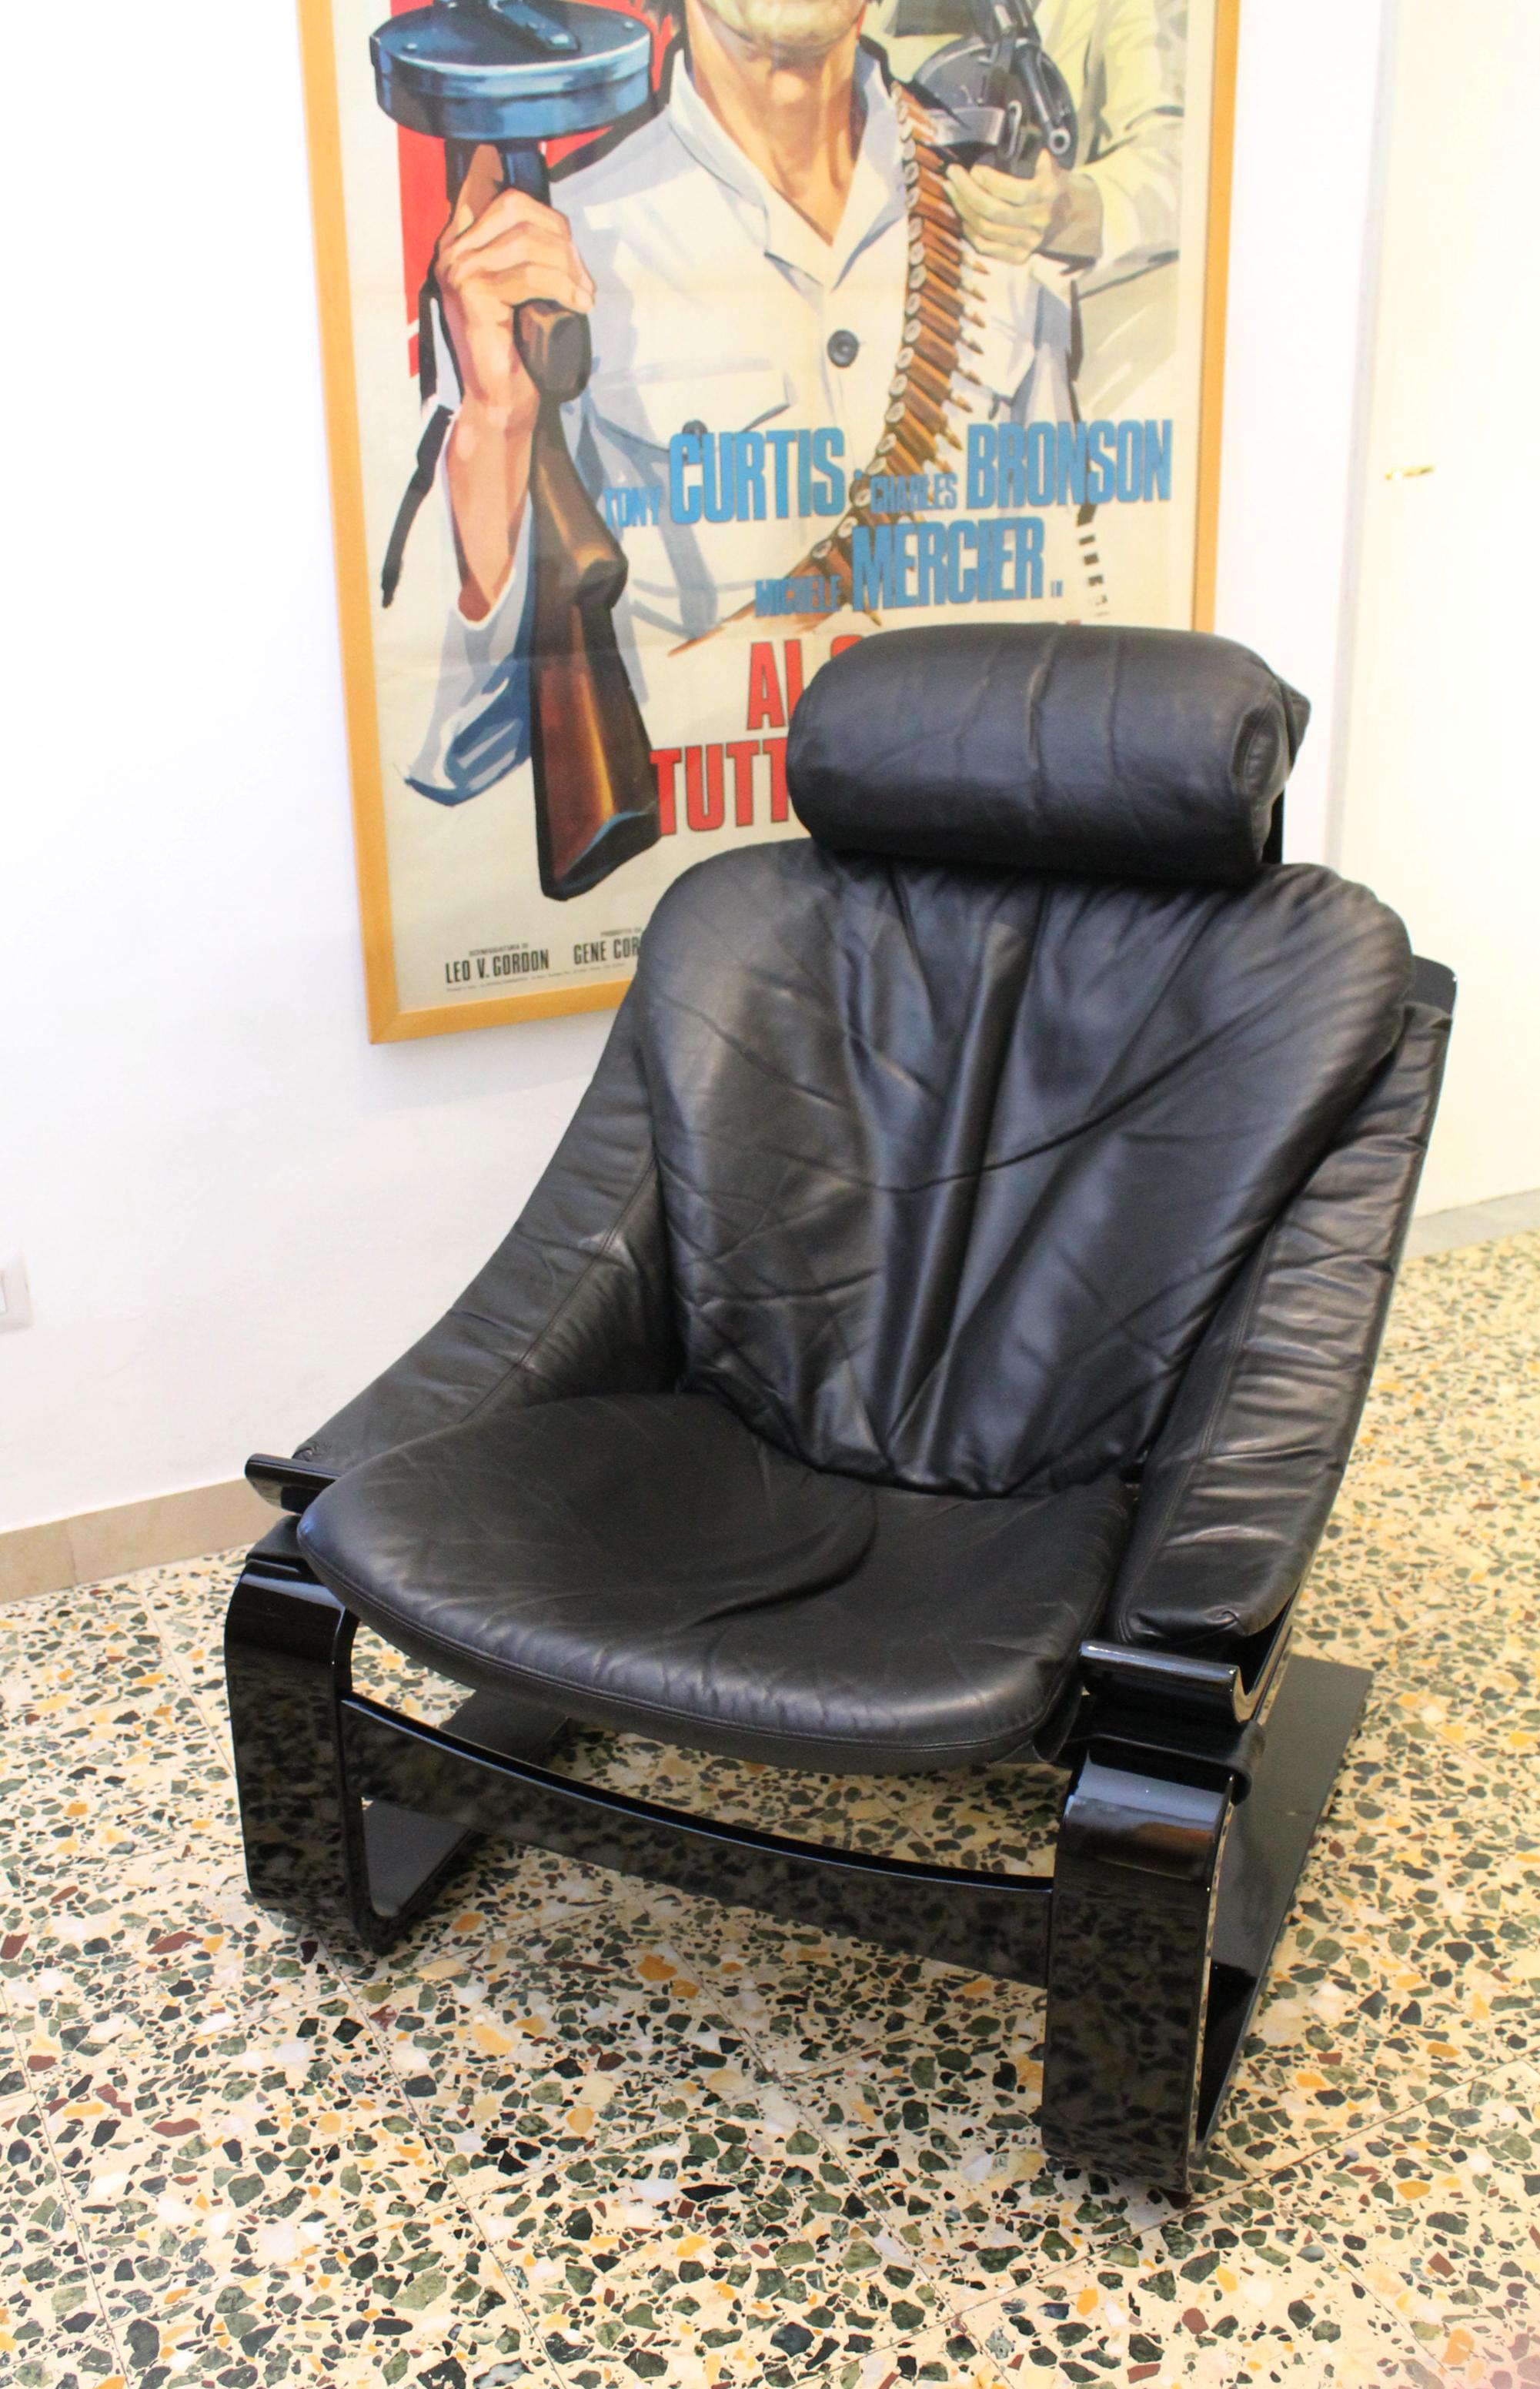 1970s Swedish design by Ake Fribyter  Kroken lounge chair. Original upholstery in black leather  Removable headrest and seat with backrest, adjustable headrest. Manufactured by the Swedish brand Nelo in the 1970s.

Are you looking for an original